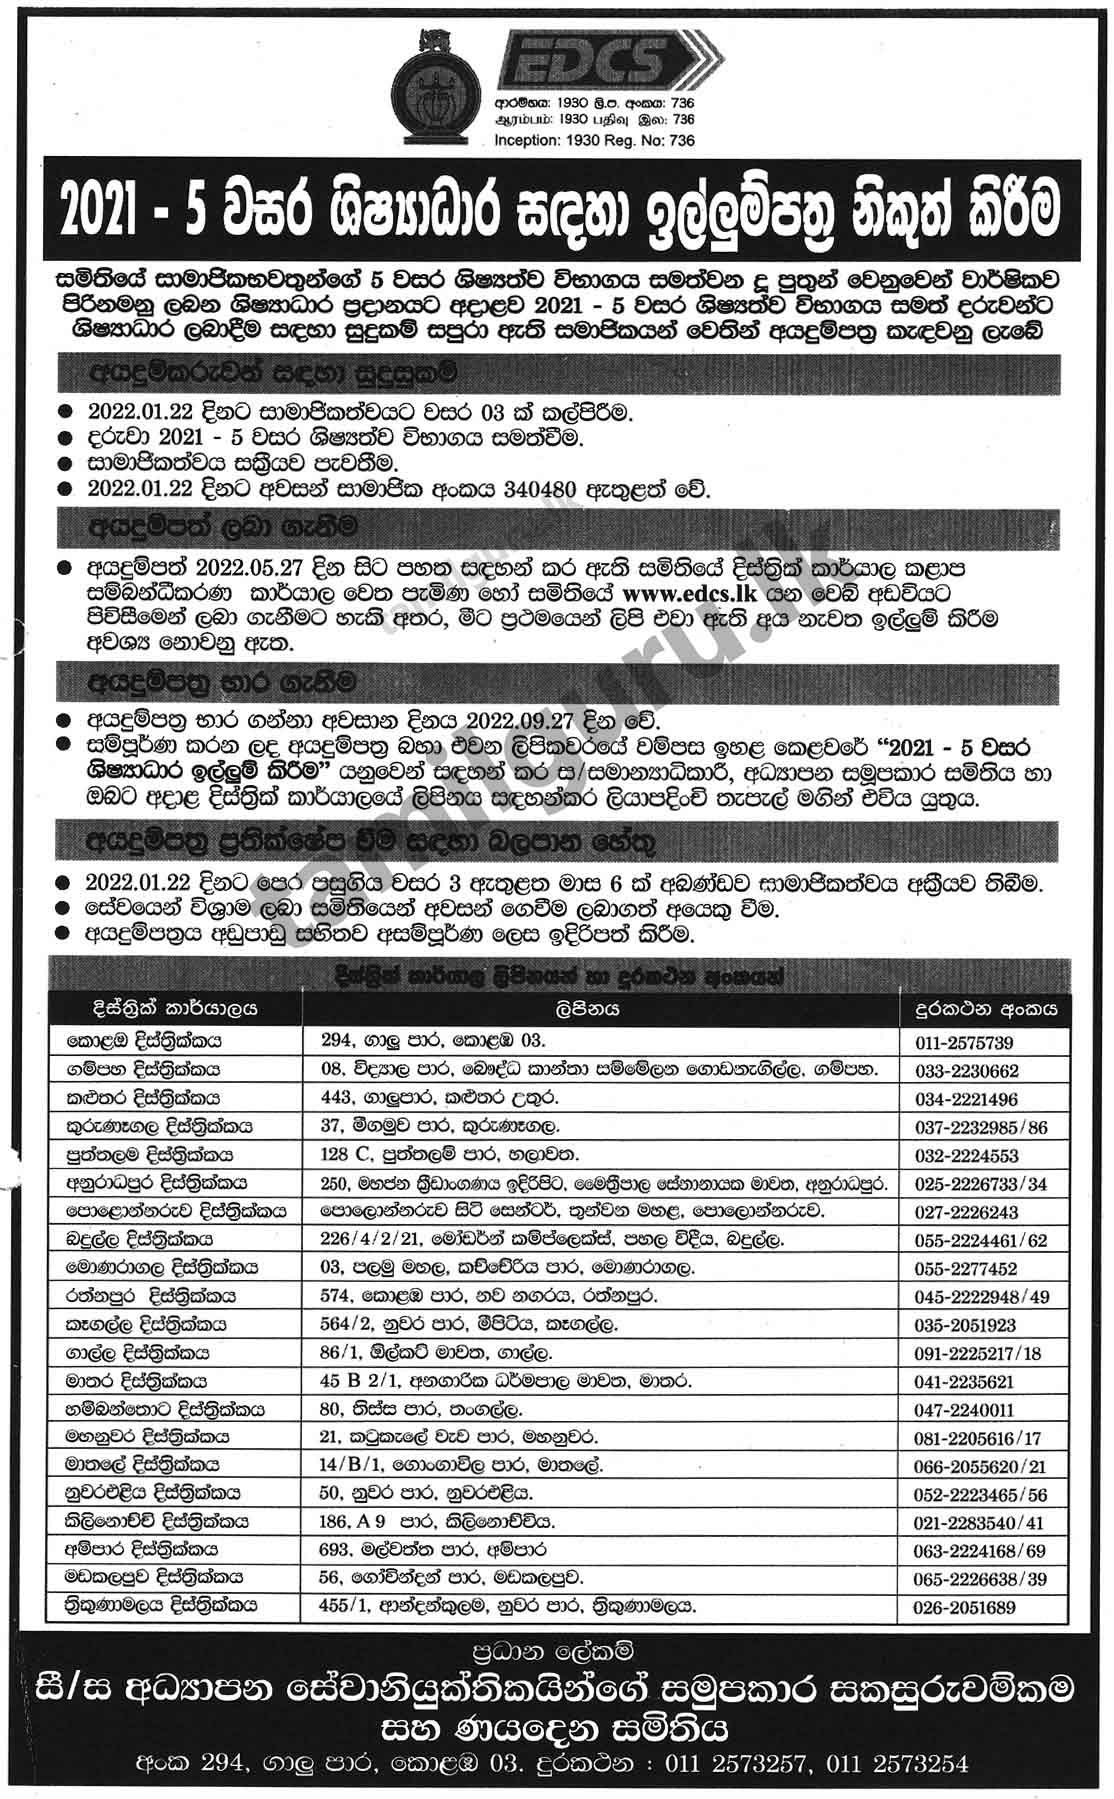 Grade 05 Scholarship Awards Scheme 2021 (2022) - Education Employees Cooperative Thrift and Credit Society (EDCS) (Details in Sinhala)